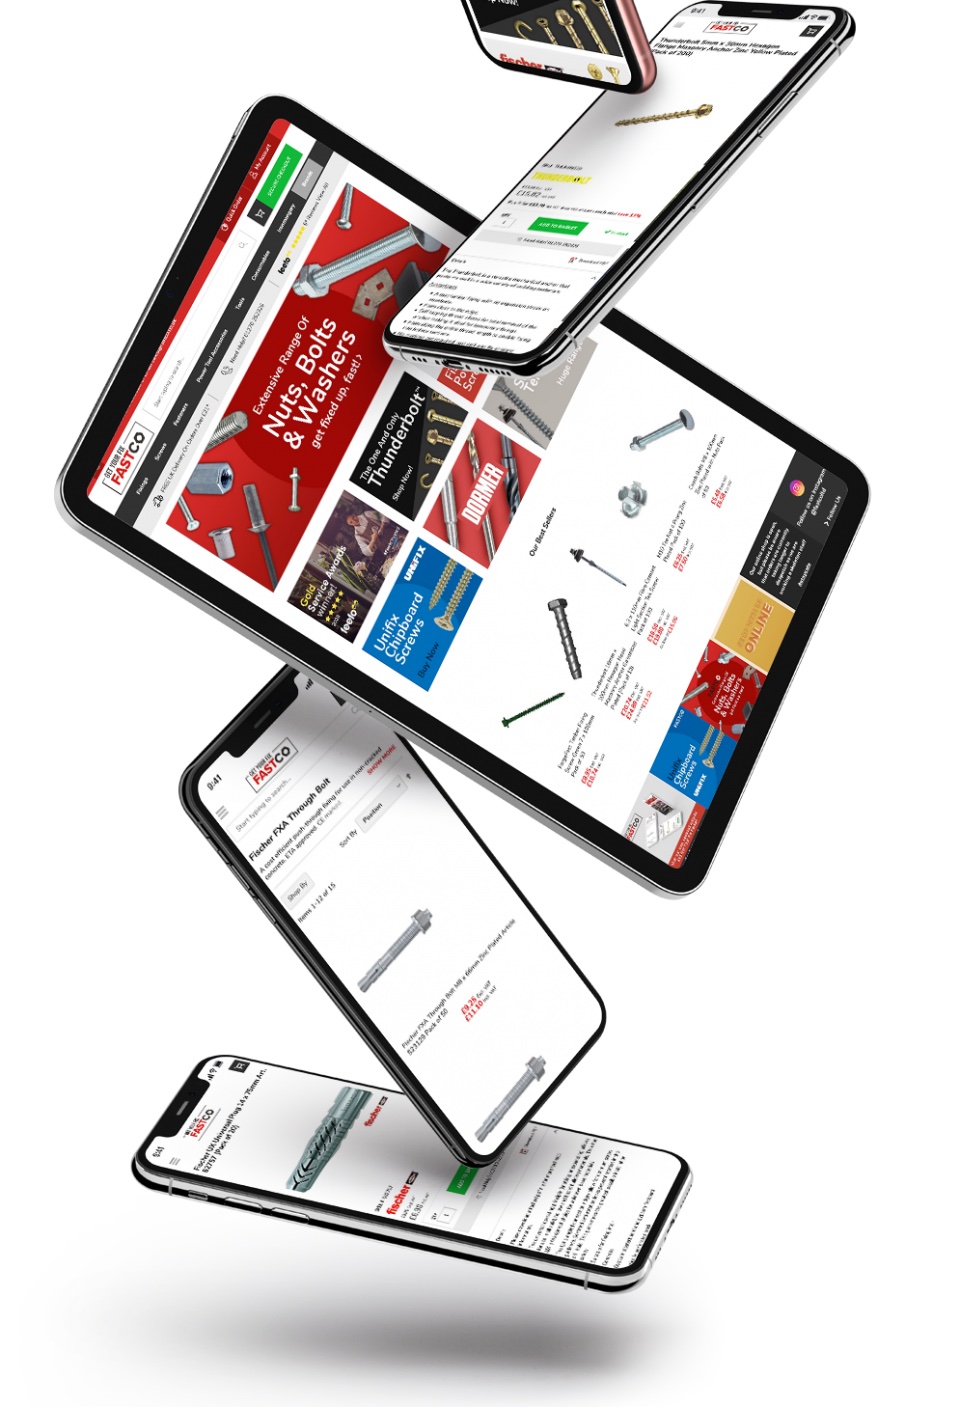 Verve Our Work Portfolio fastco website on tablet and mobile screens